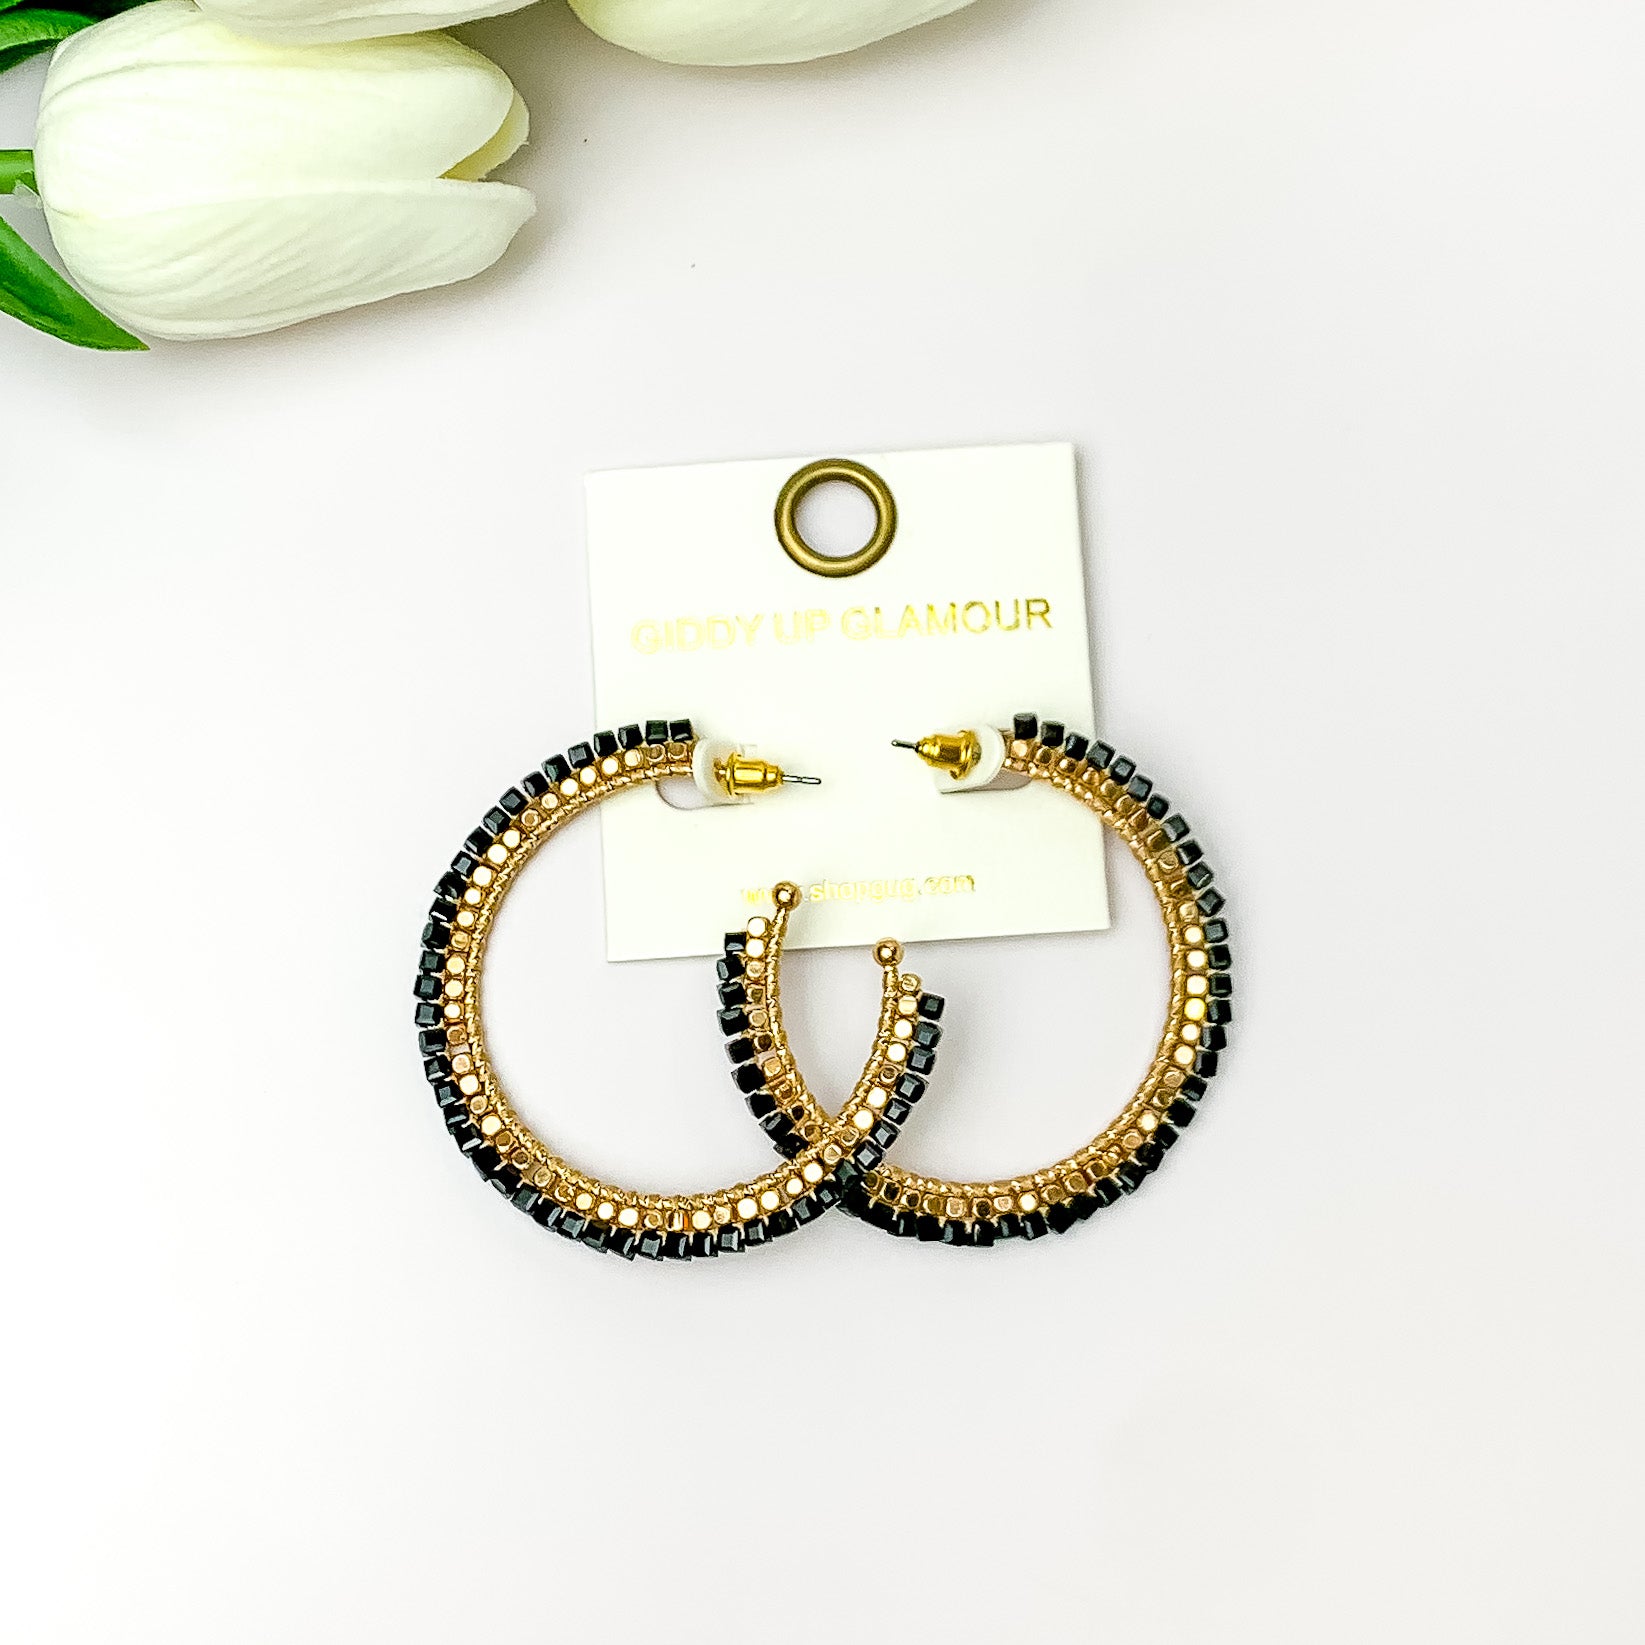 Pictured are circle gold toned hoop earrings with gold beads around it and black crystal outline. They are pictured with white flowers on a white background.